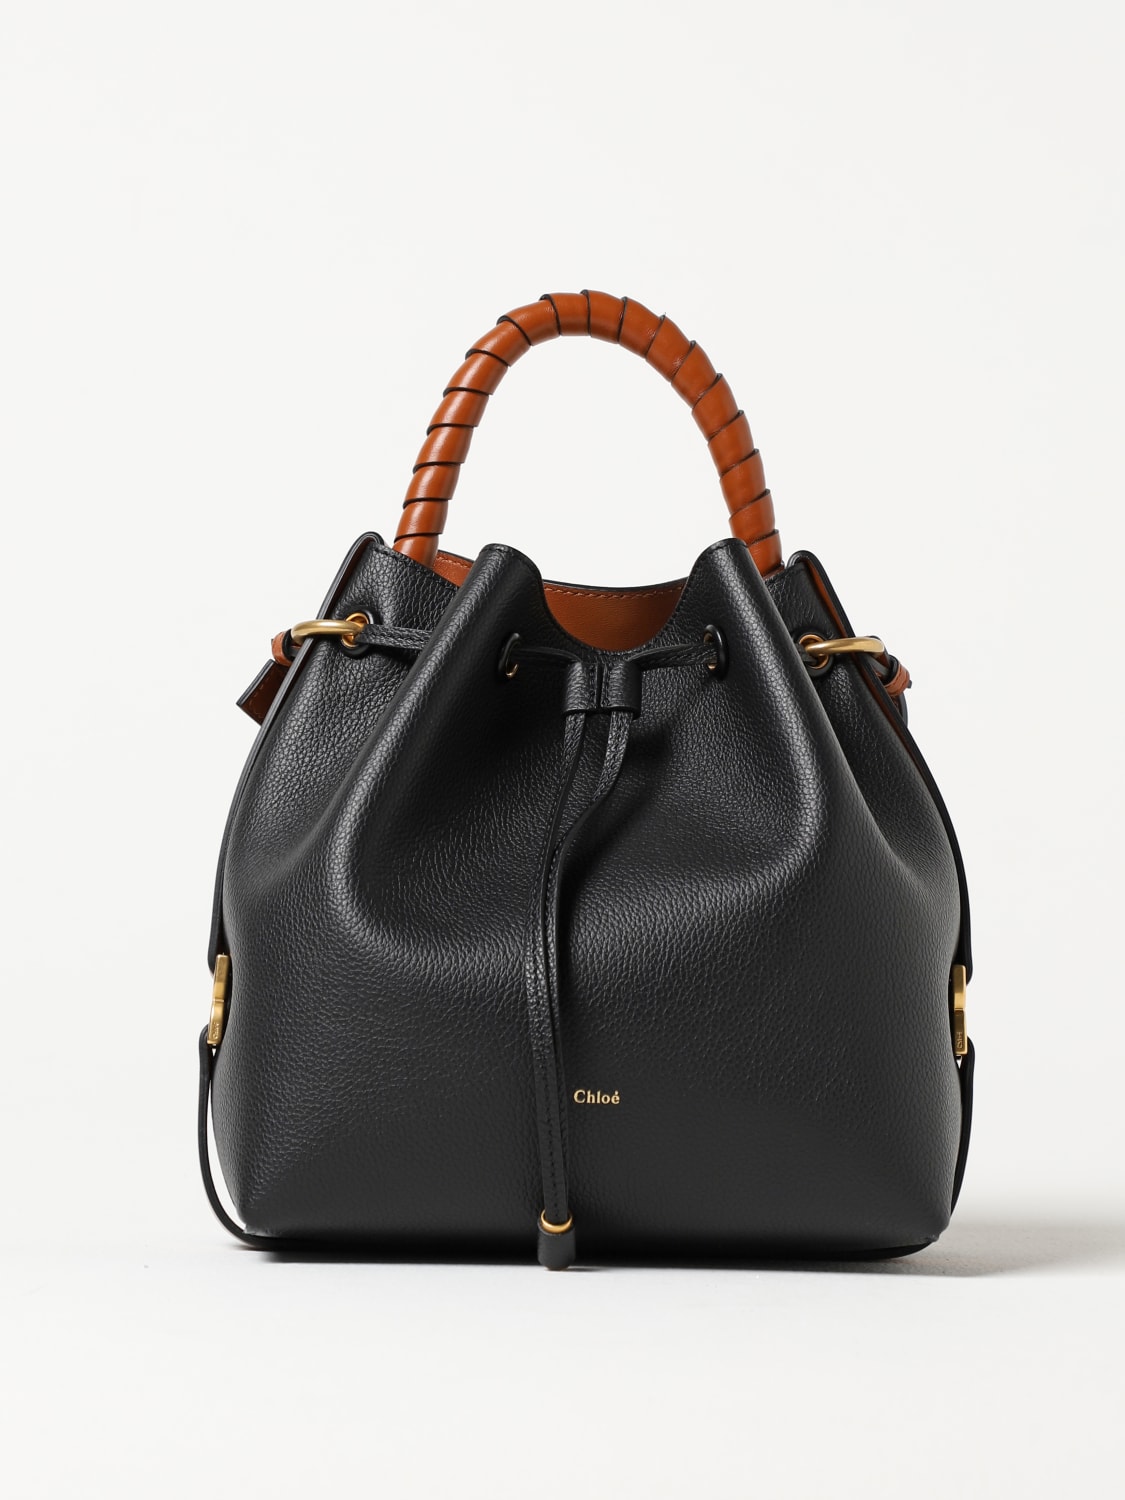 Chloé Marcie Bag in Grained Leather